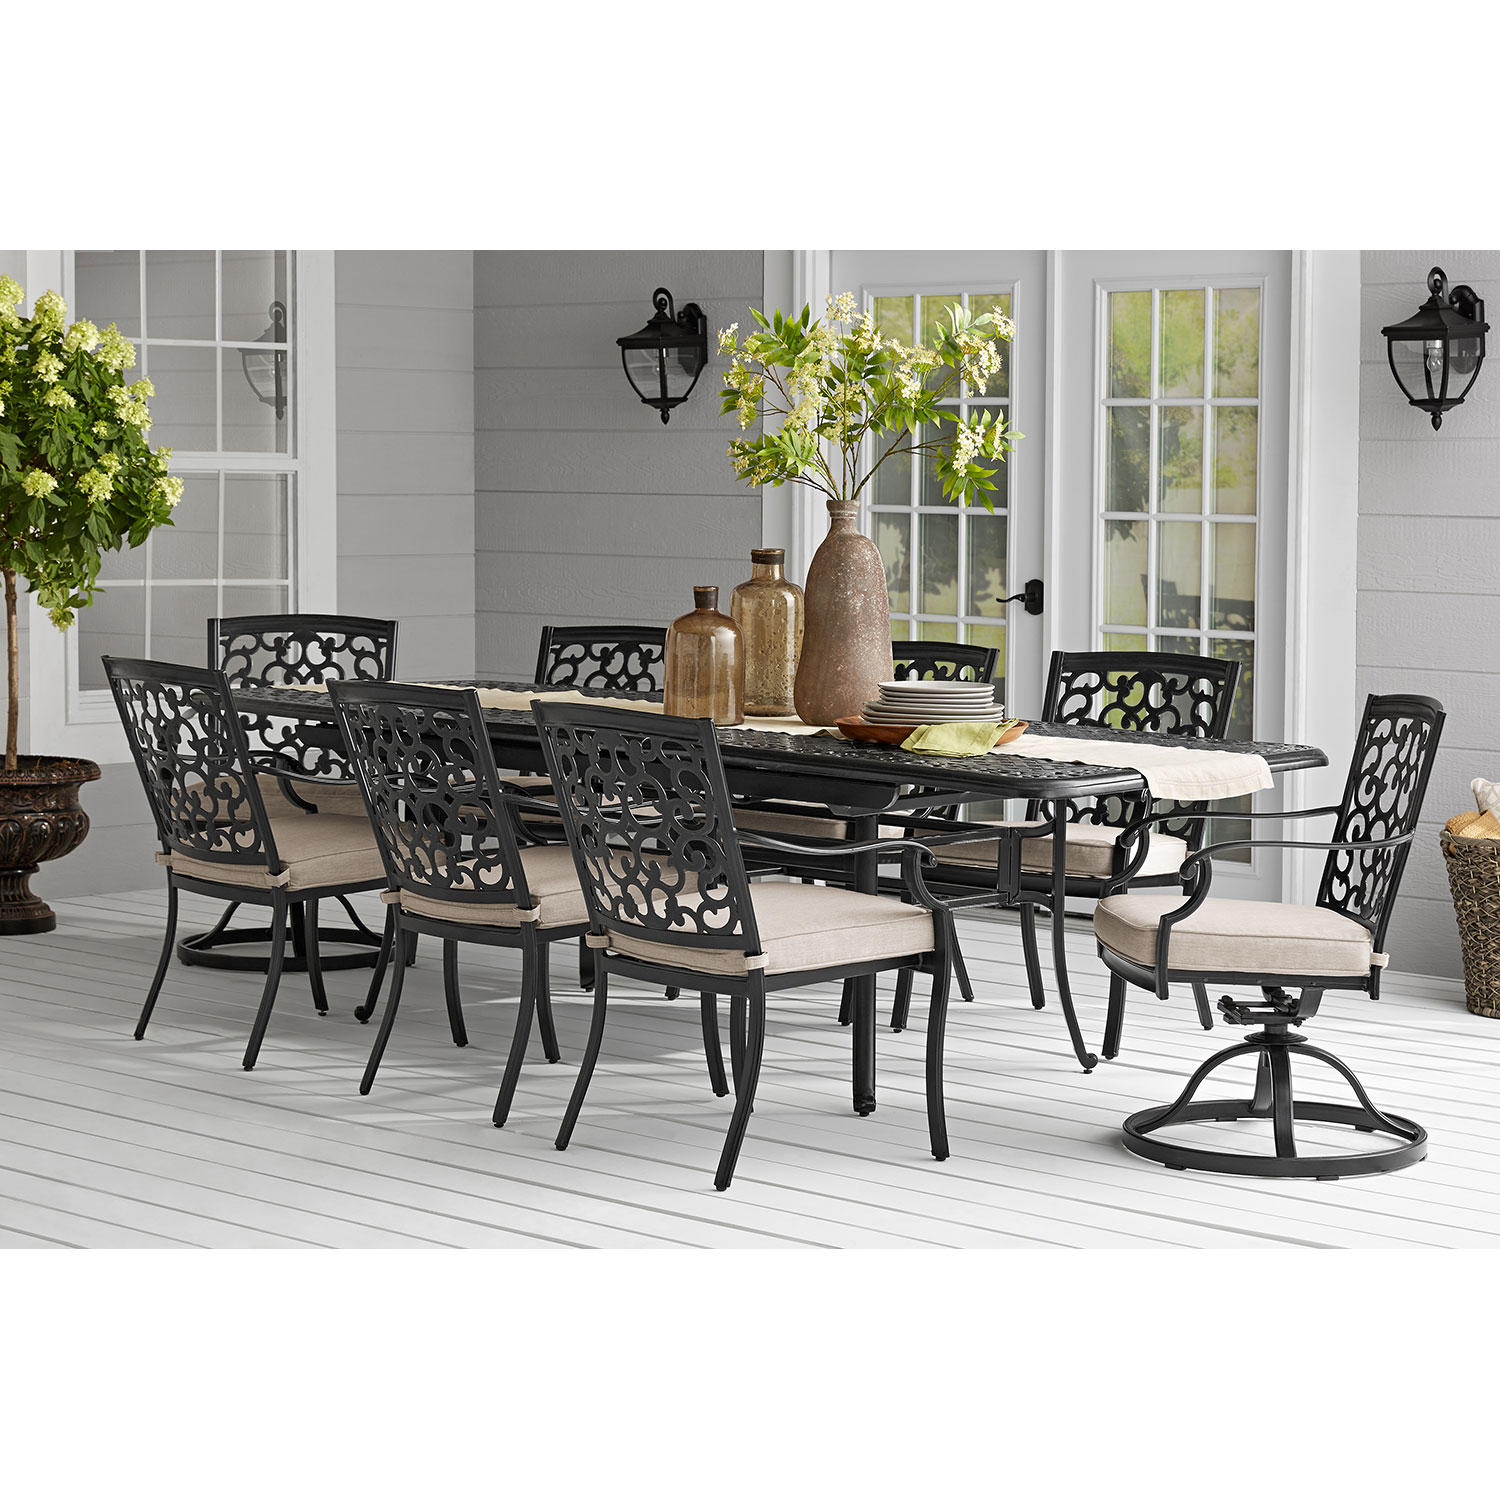 Member’s Mark Agio Hastings 9-Piece Extension Table Dining Set with Sunbrella Fabric